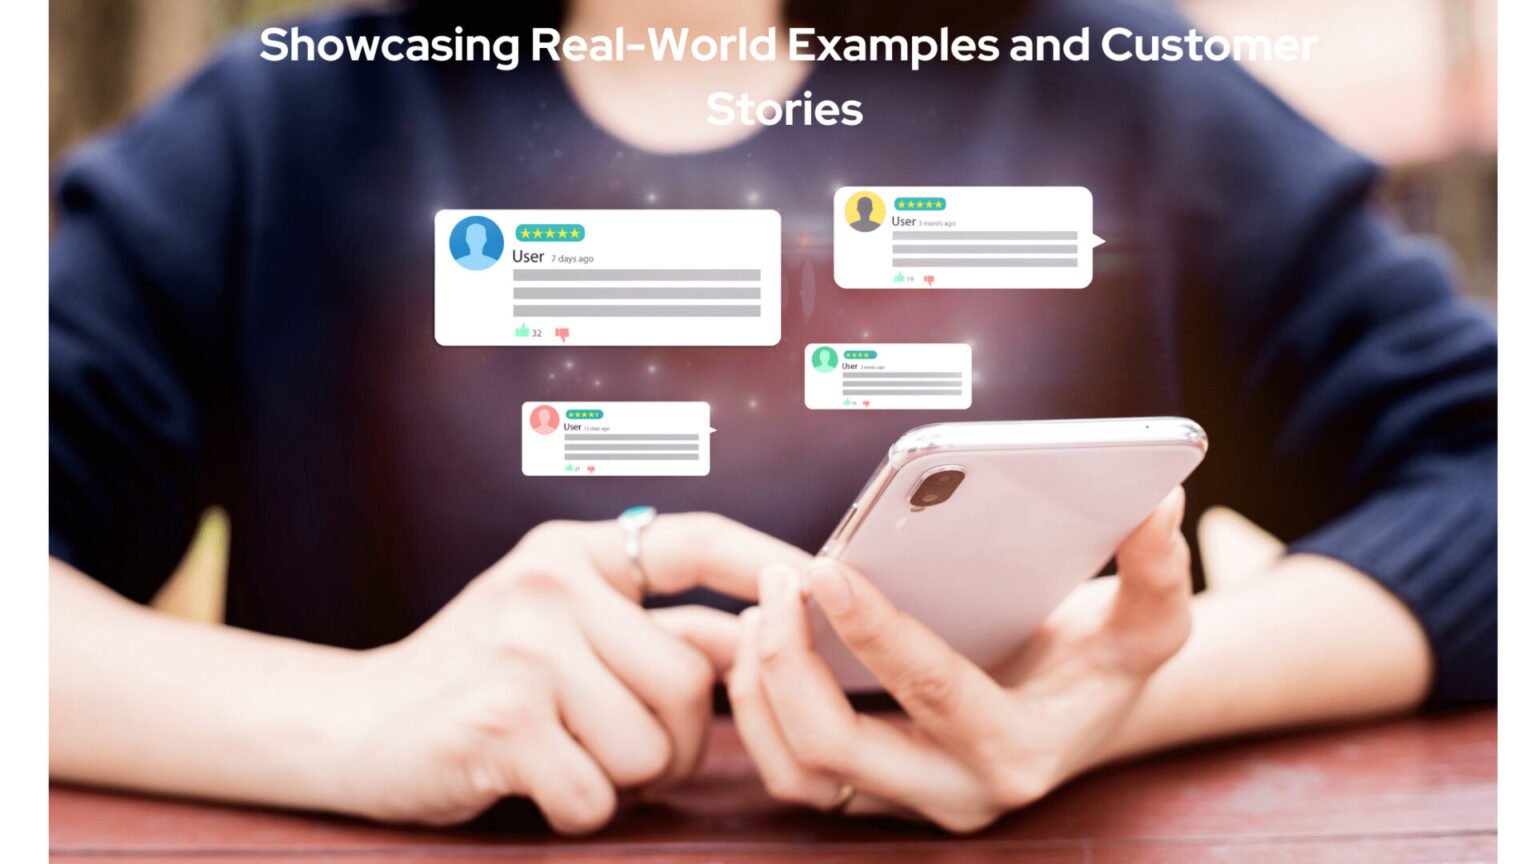 . Showcasing Real-World Examples and Customer Stories: